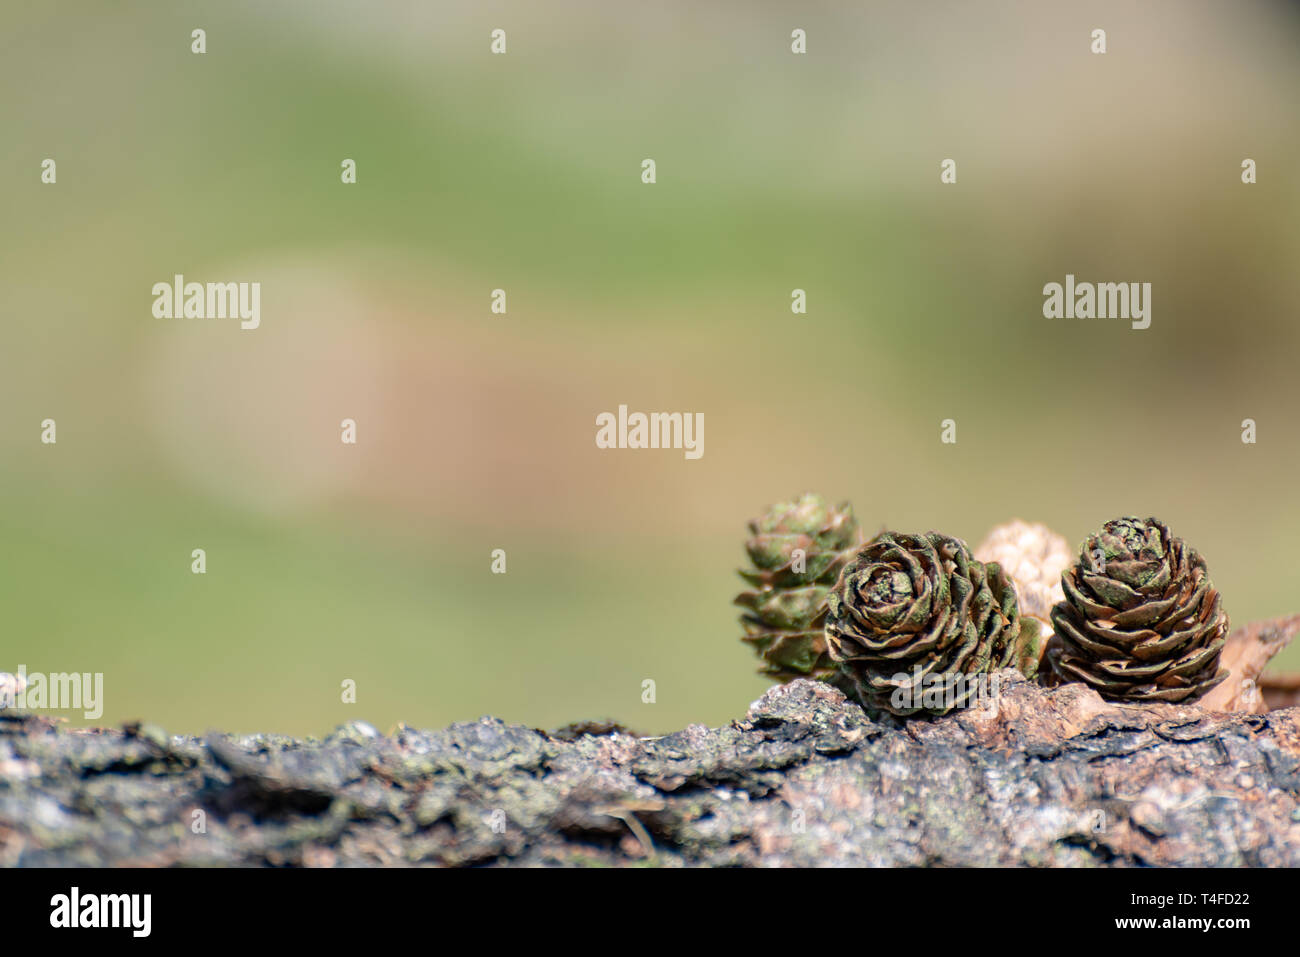 Conifer pine cones in a natural rural outdoor woodland environment. Stock Photo